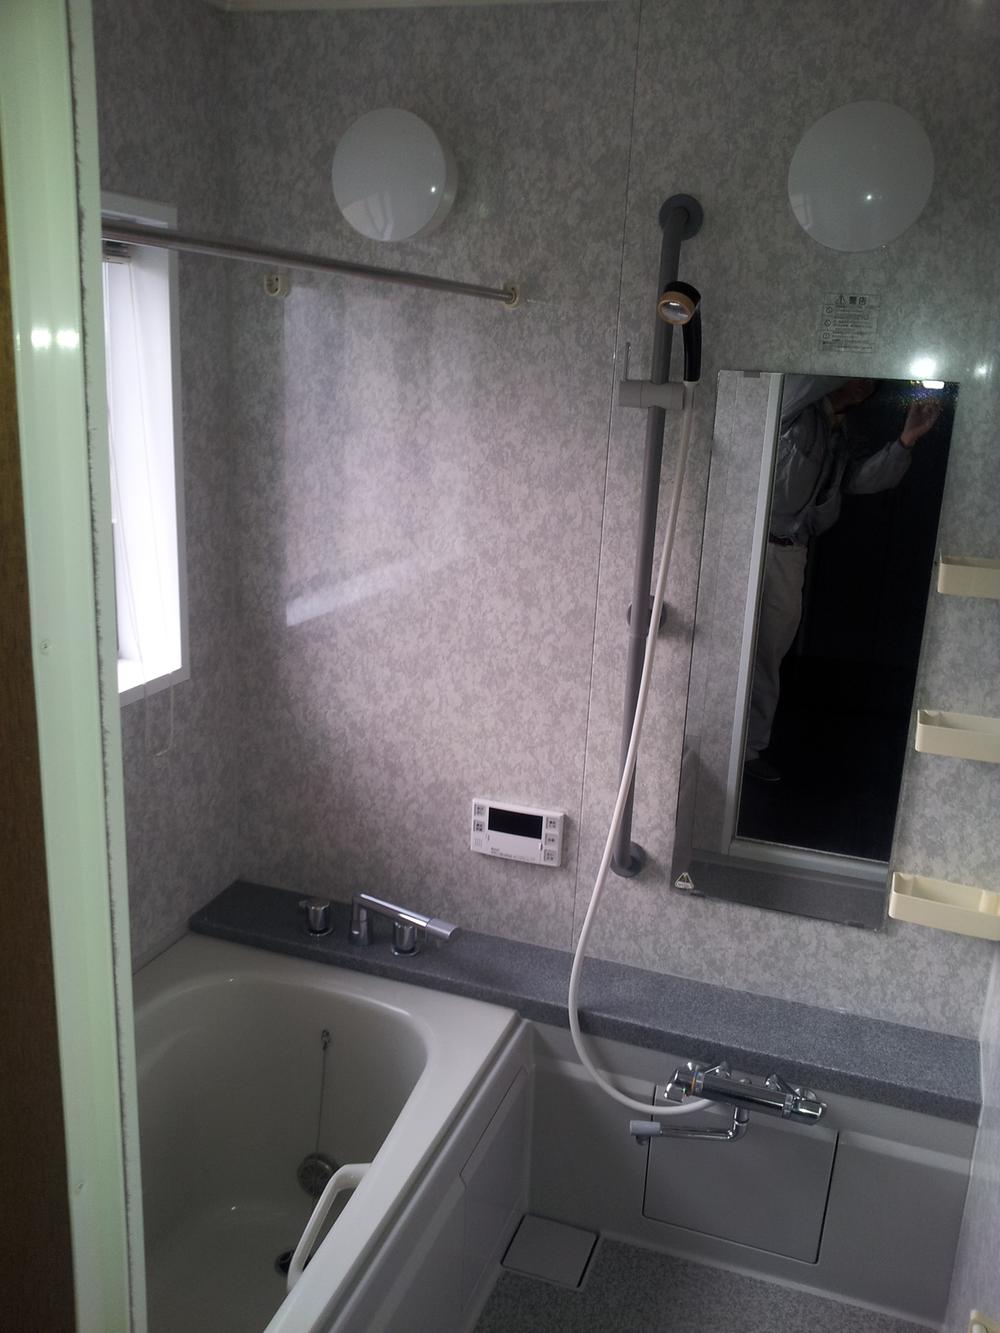 Bathroom. It is also a shiny unit bus of 1 pyeong type.